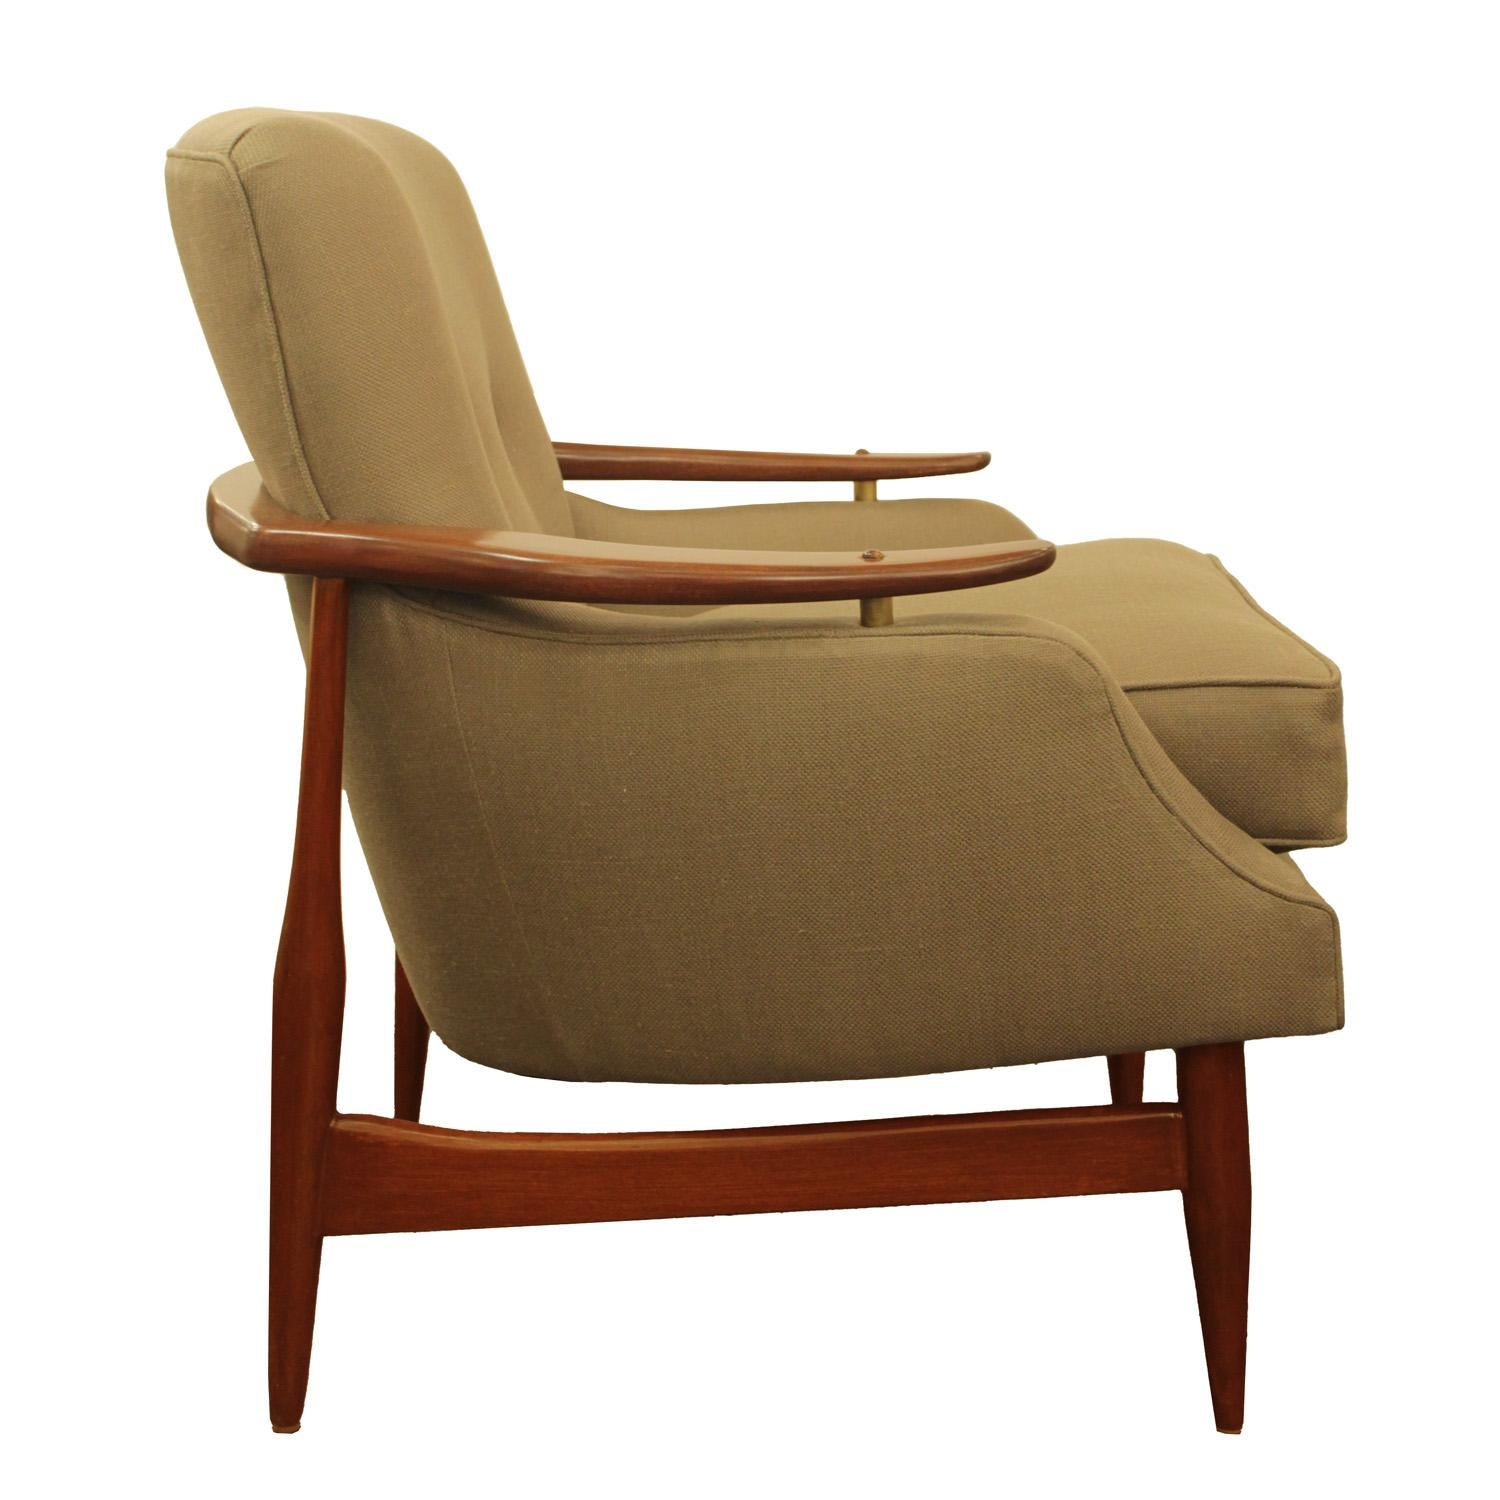 Hand-Crafted Finn Juhl Inspired Pair of Danish Mid-Century Lounge Chairs 1970s